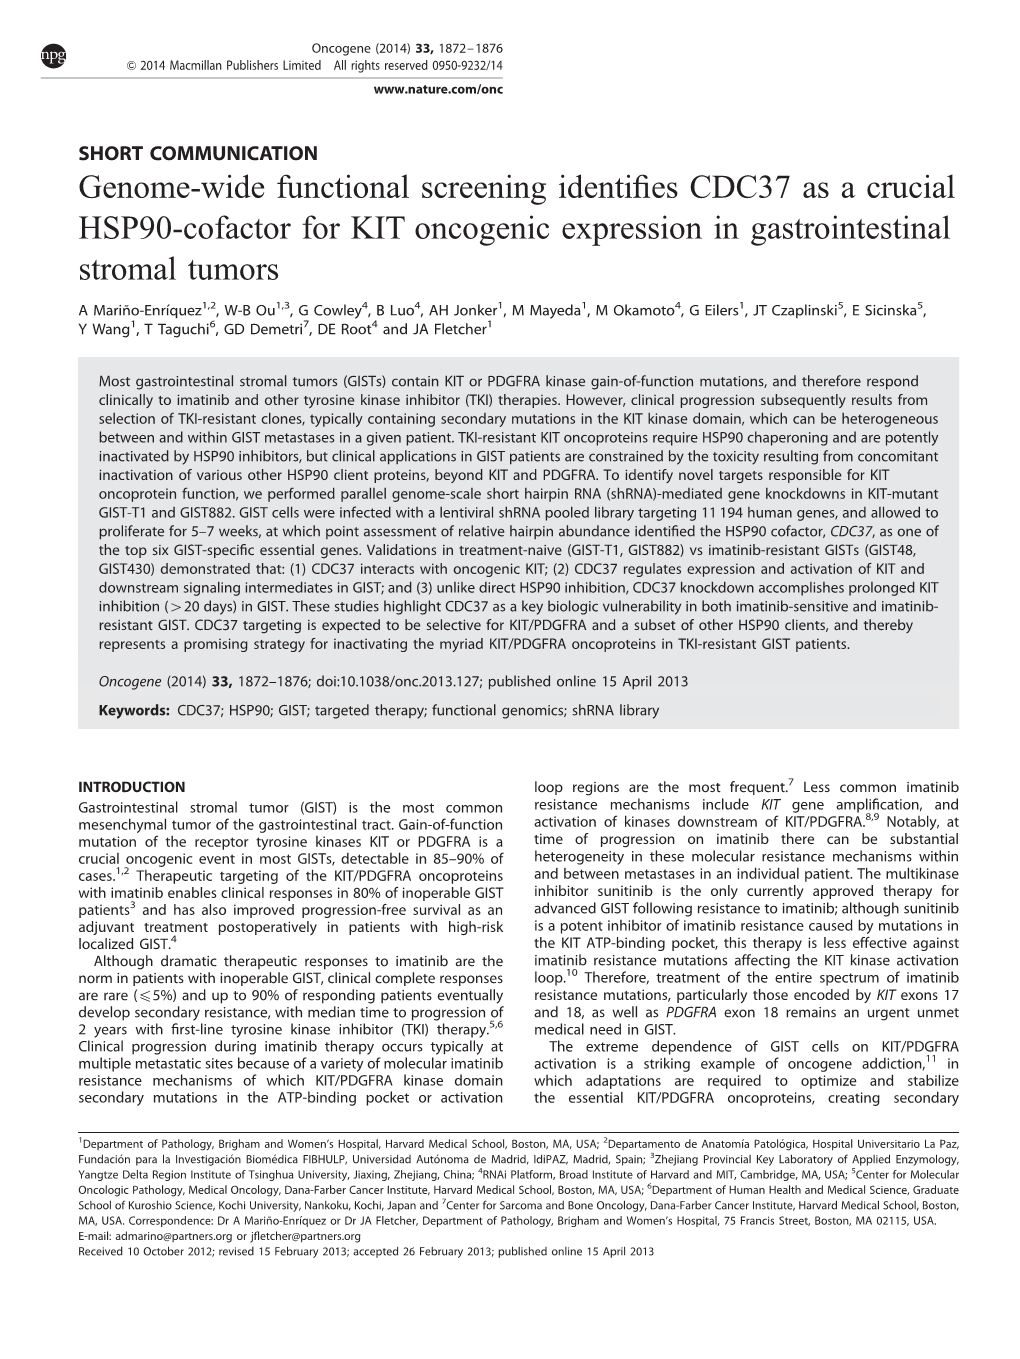 Genome-Wide Functional Screening Identifies CDC37 As a Crucial HSP90-Cofactor for KIT Oncogenic Expression in Gastrointestinal S